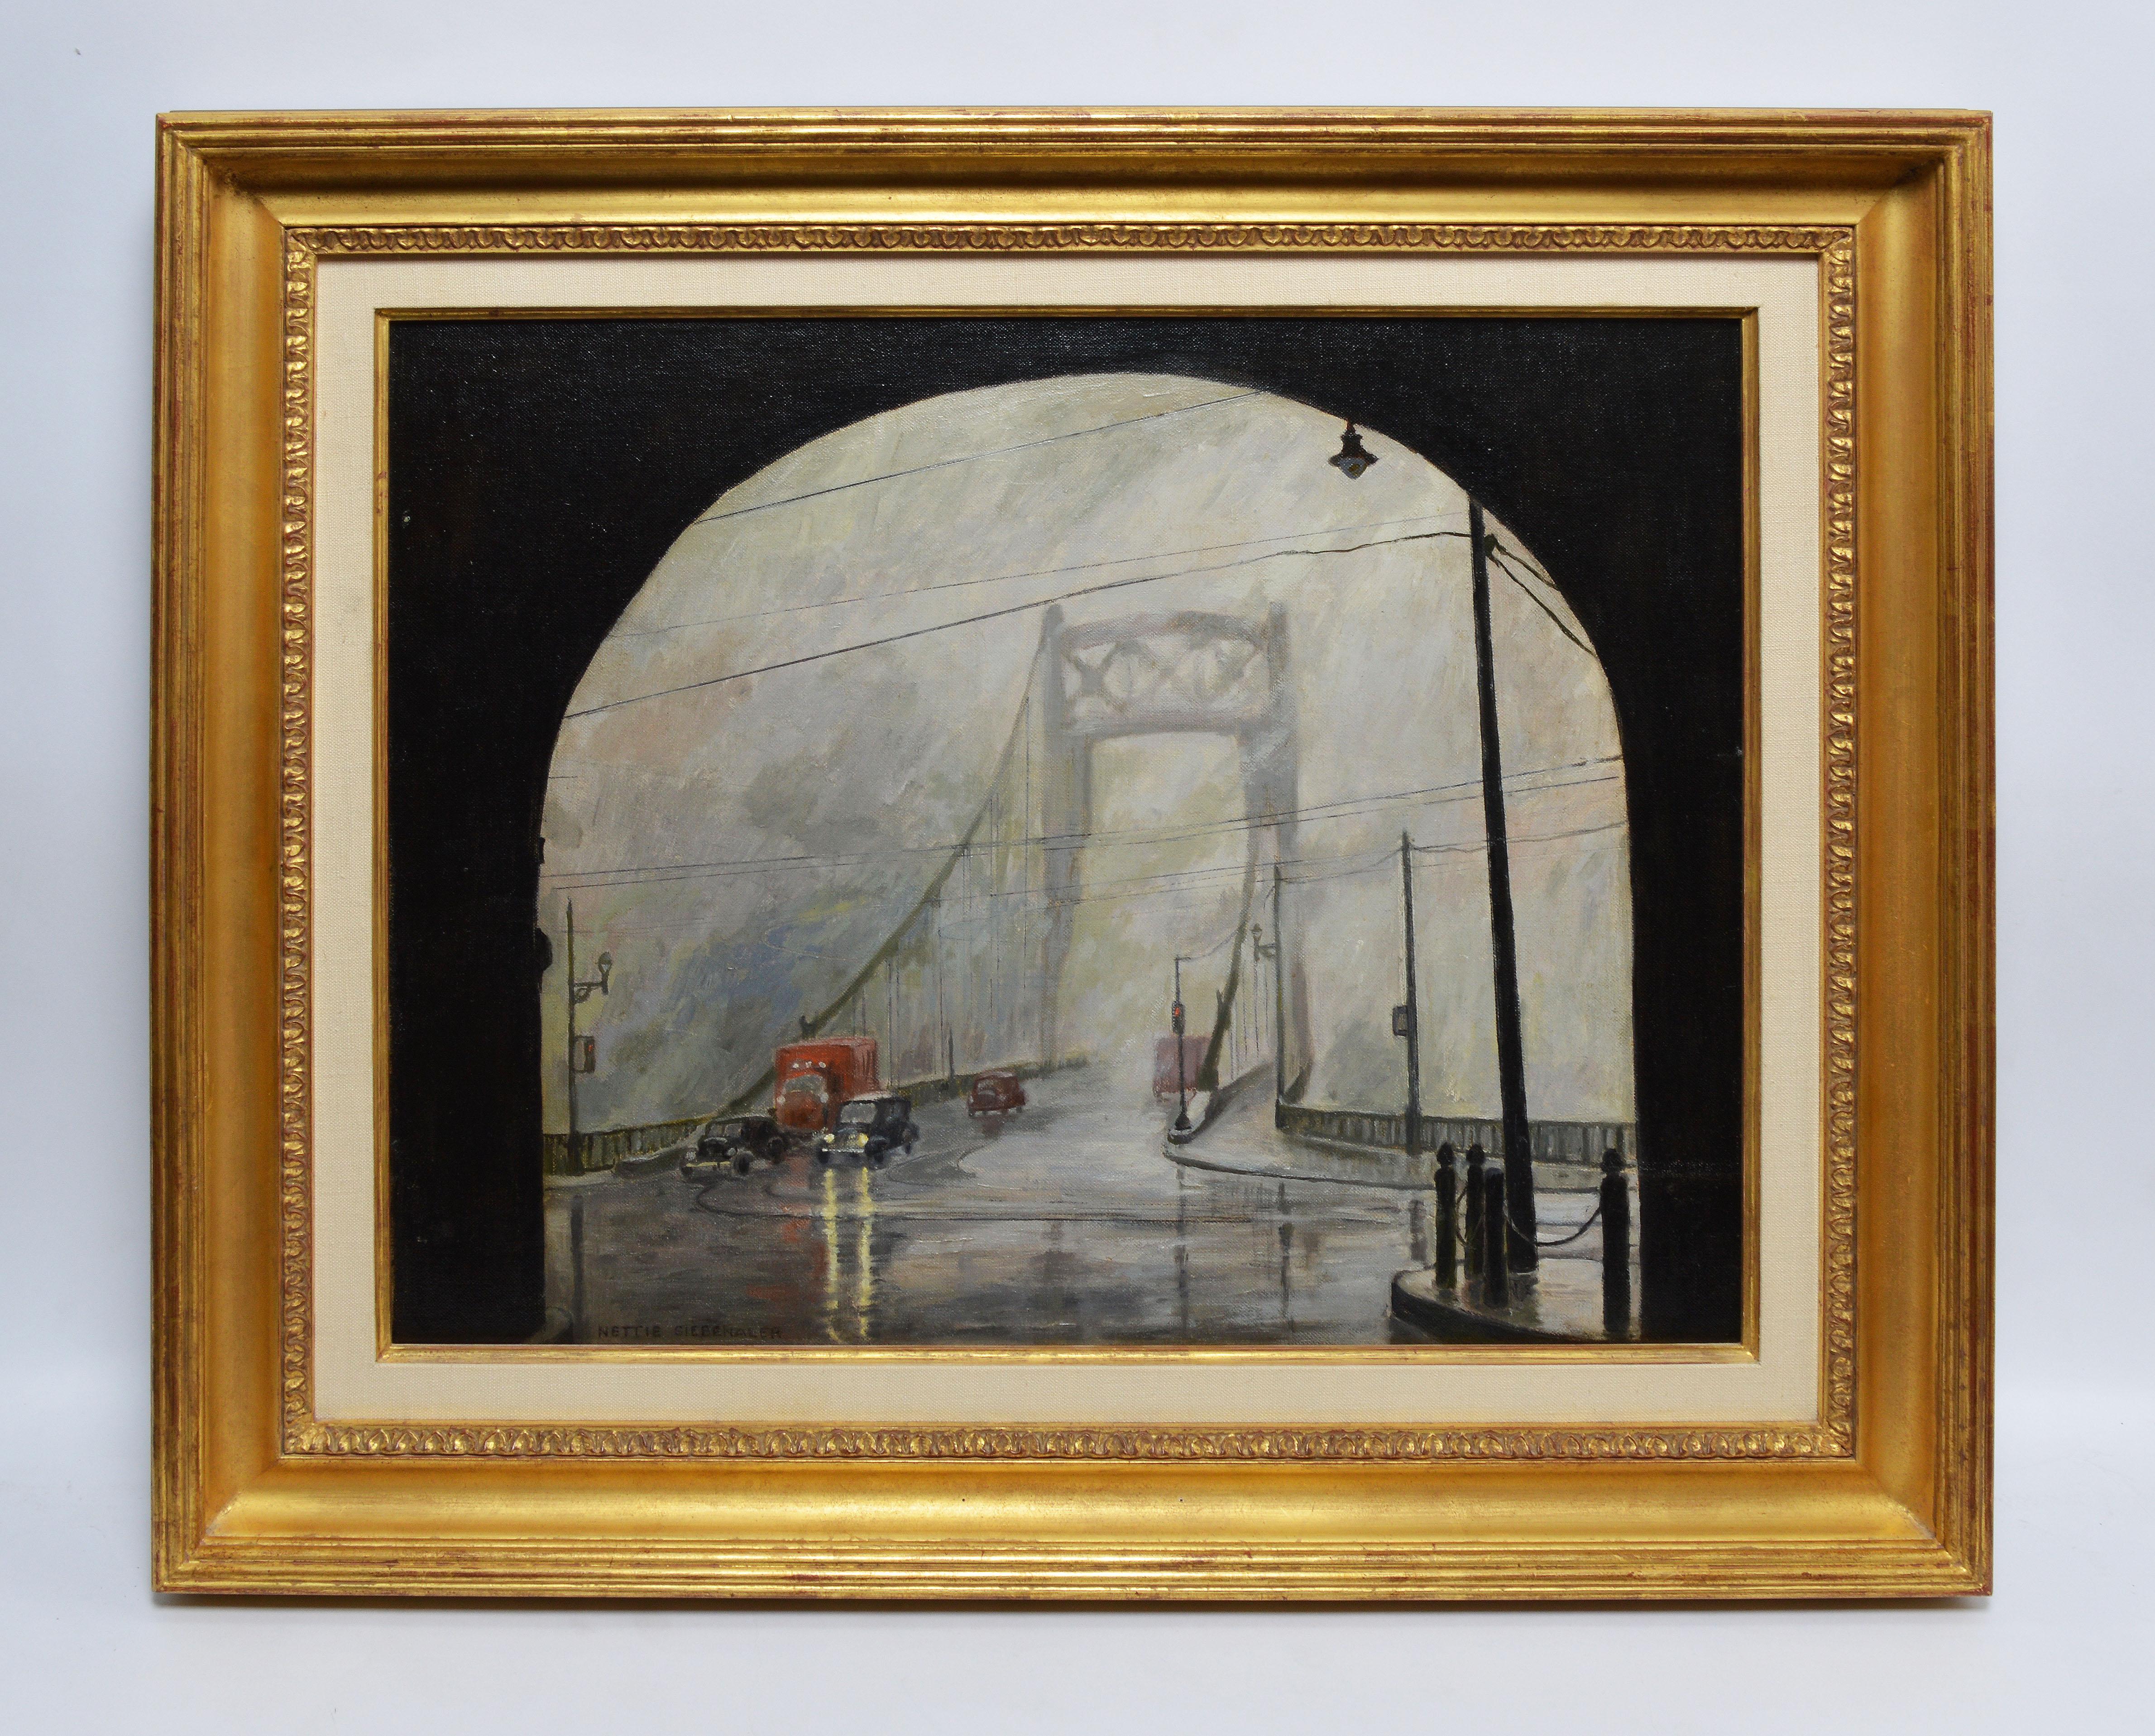 Antique American George Washington Bridge Foggy New York Cityscape WPA Painting - Brown Landscape Painting by Unknown